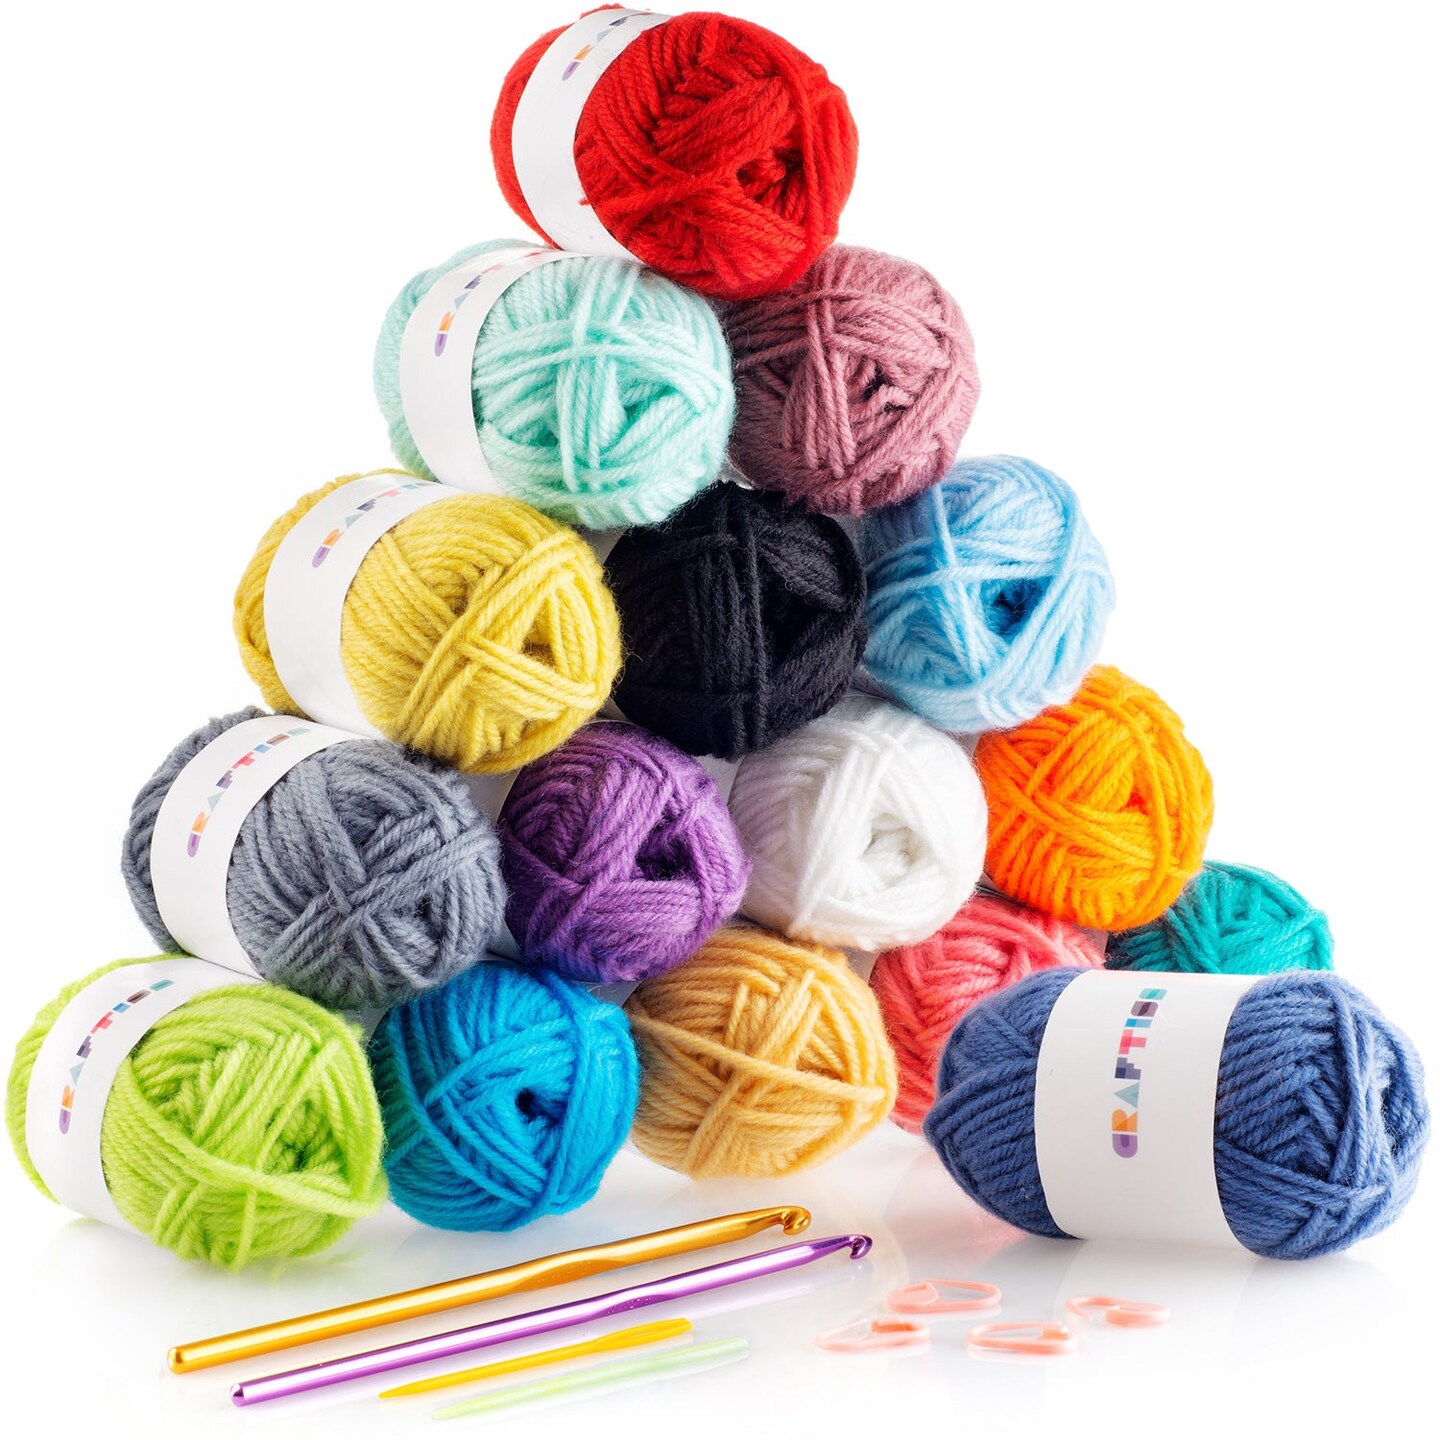 6 Rolls Large Yarn Skeins Assorted Colors Acrylic Soft Yarn Perfect for Any  Knitting Crochet and Crafts Mini Project